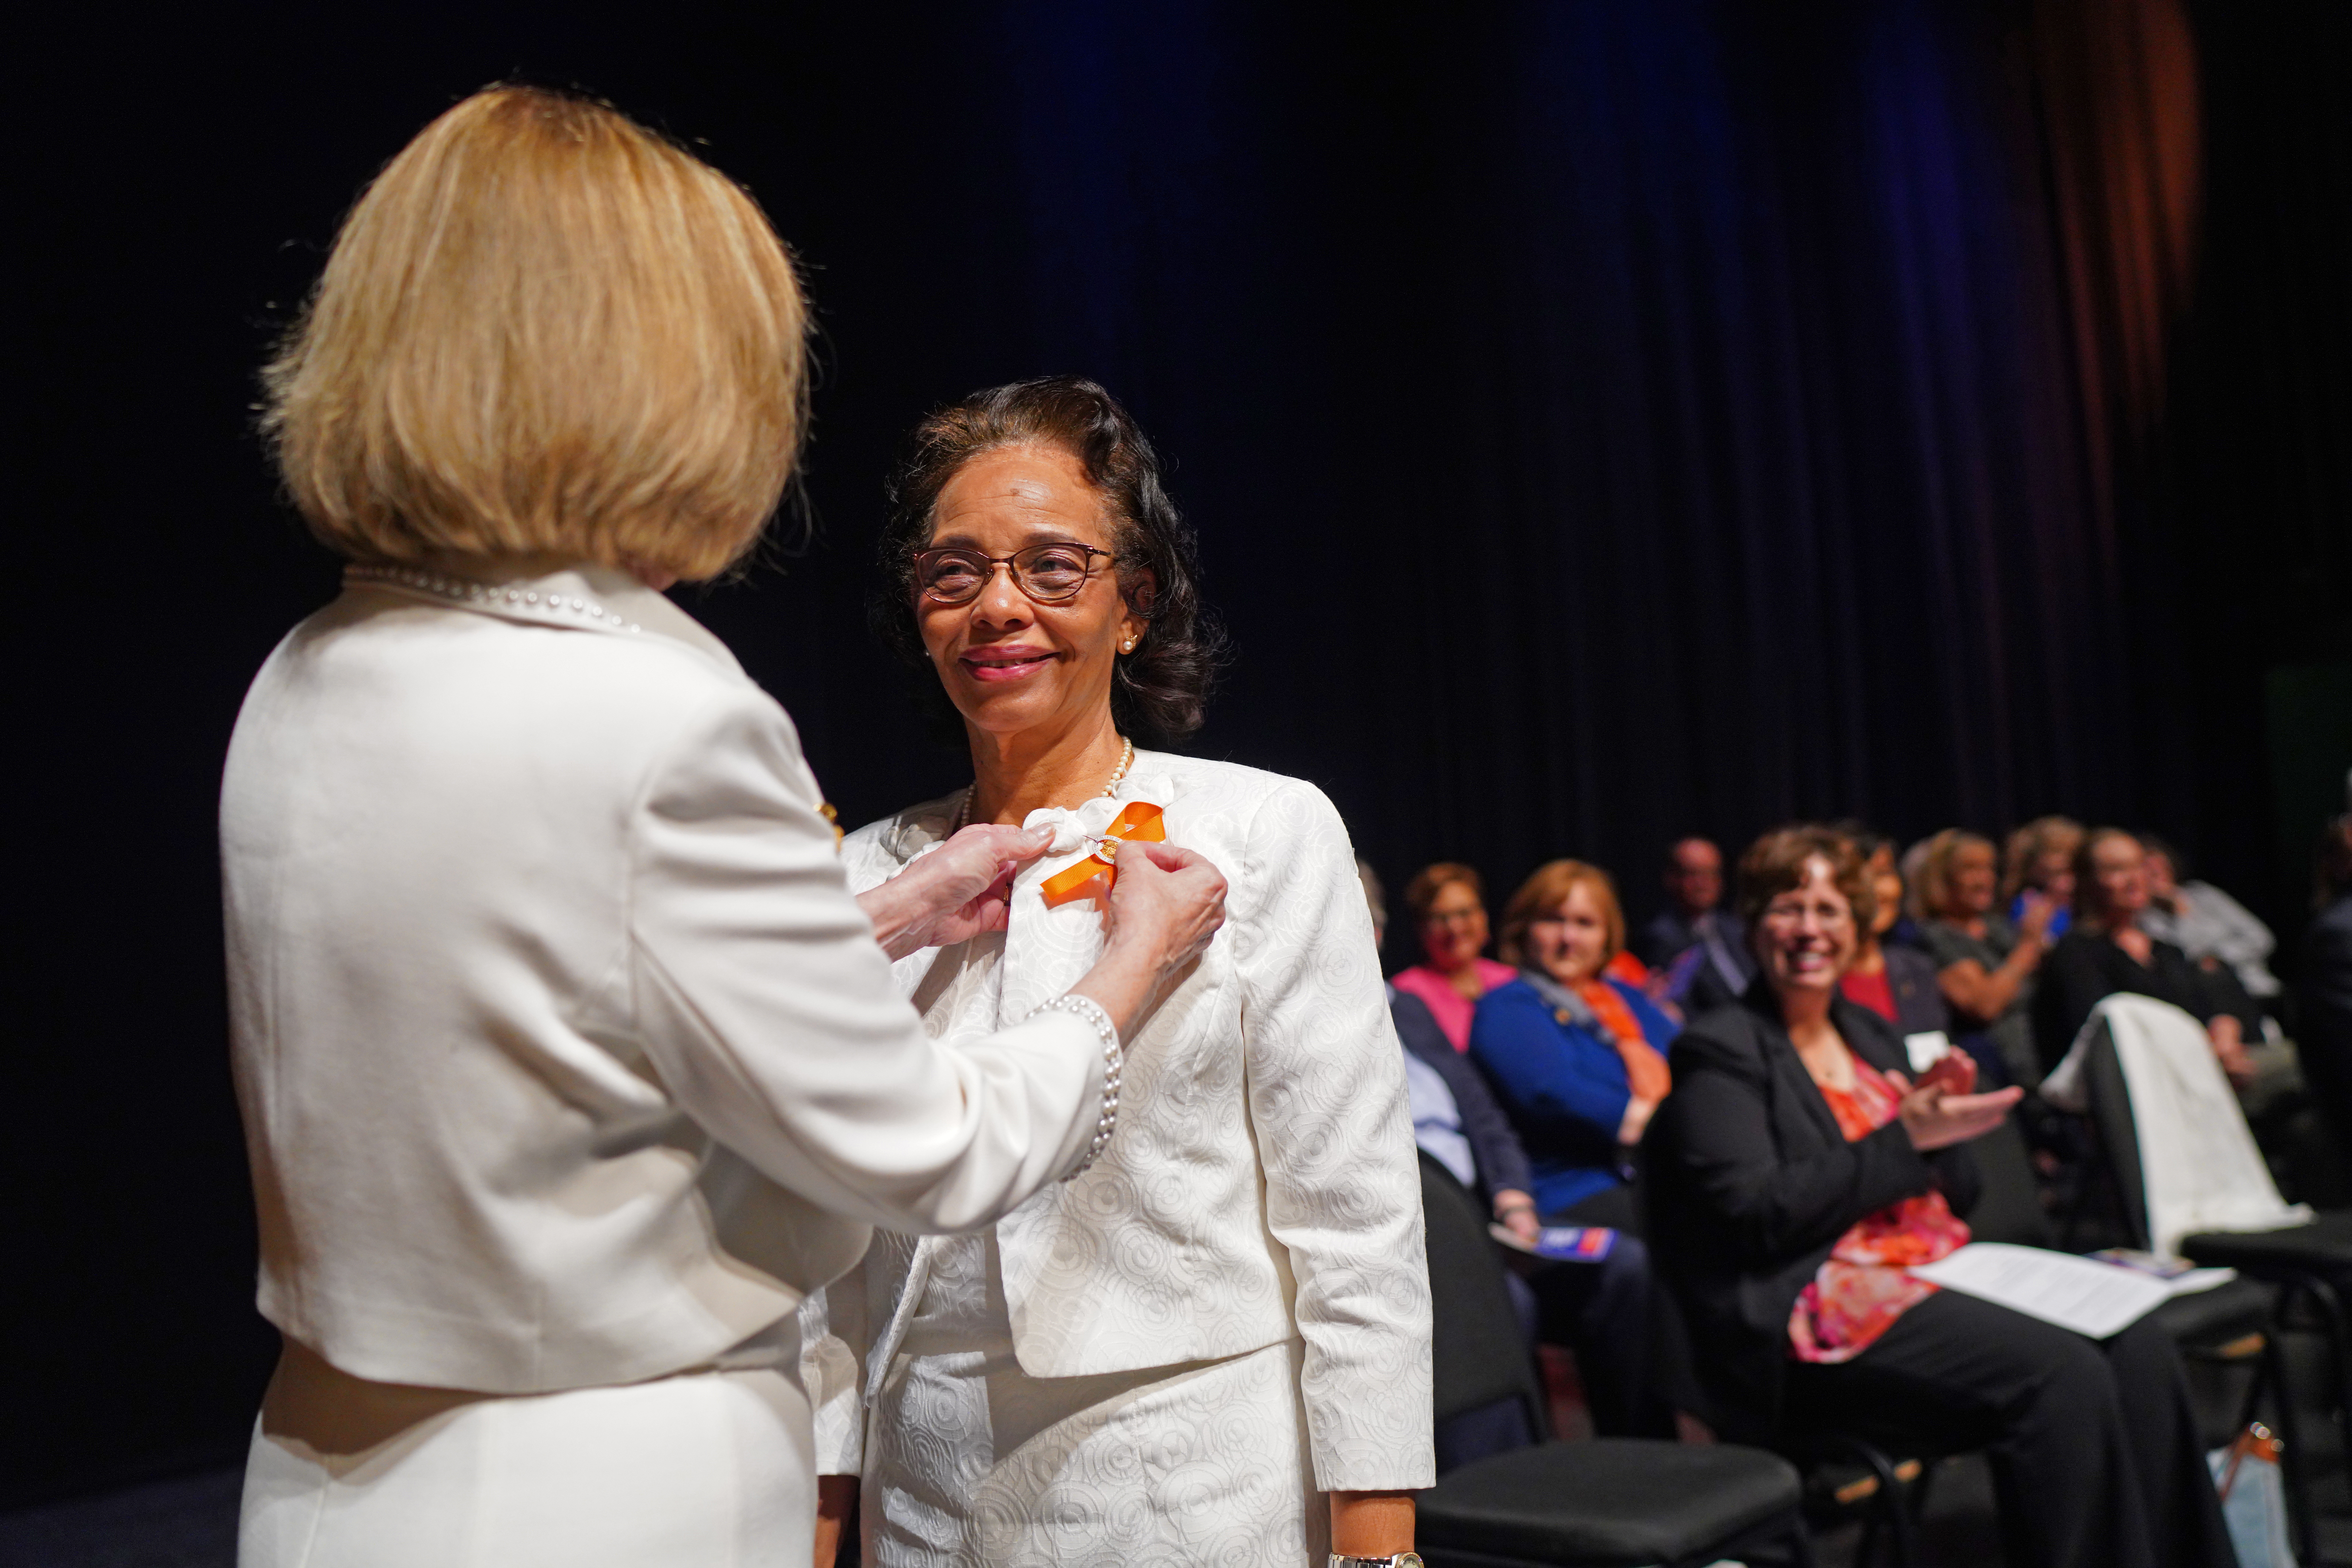 A woman is pinning another woman's shirt at a ceremony on stage. 